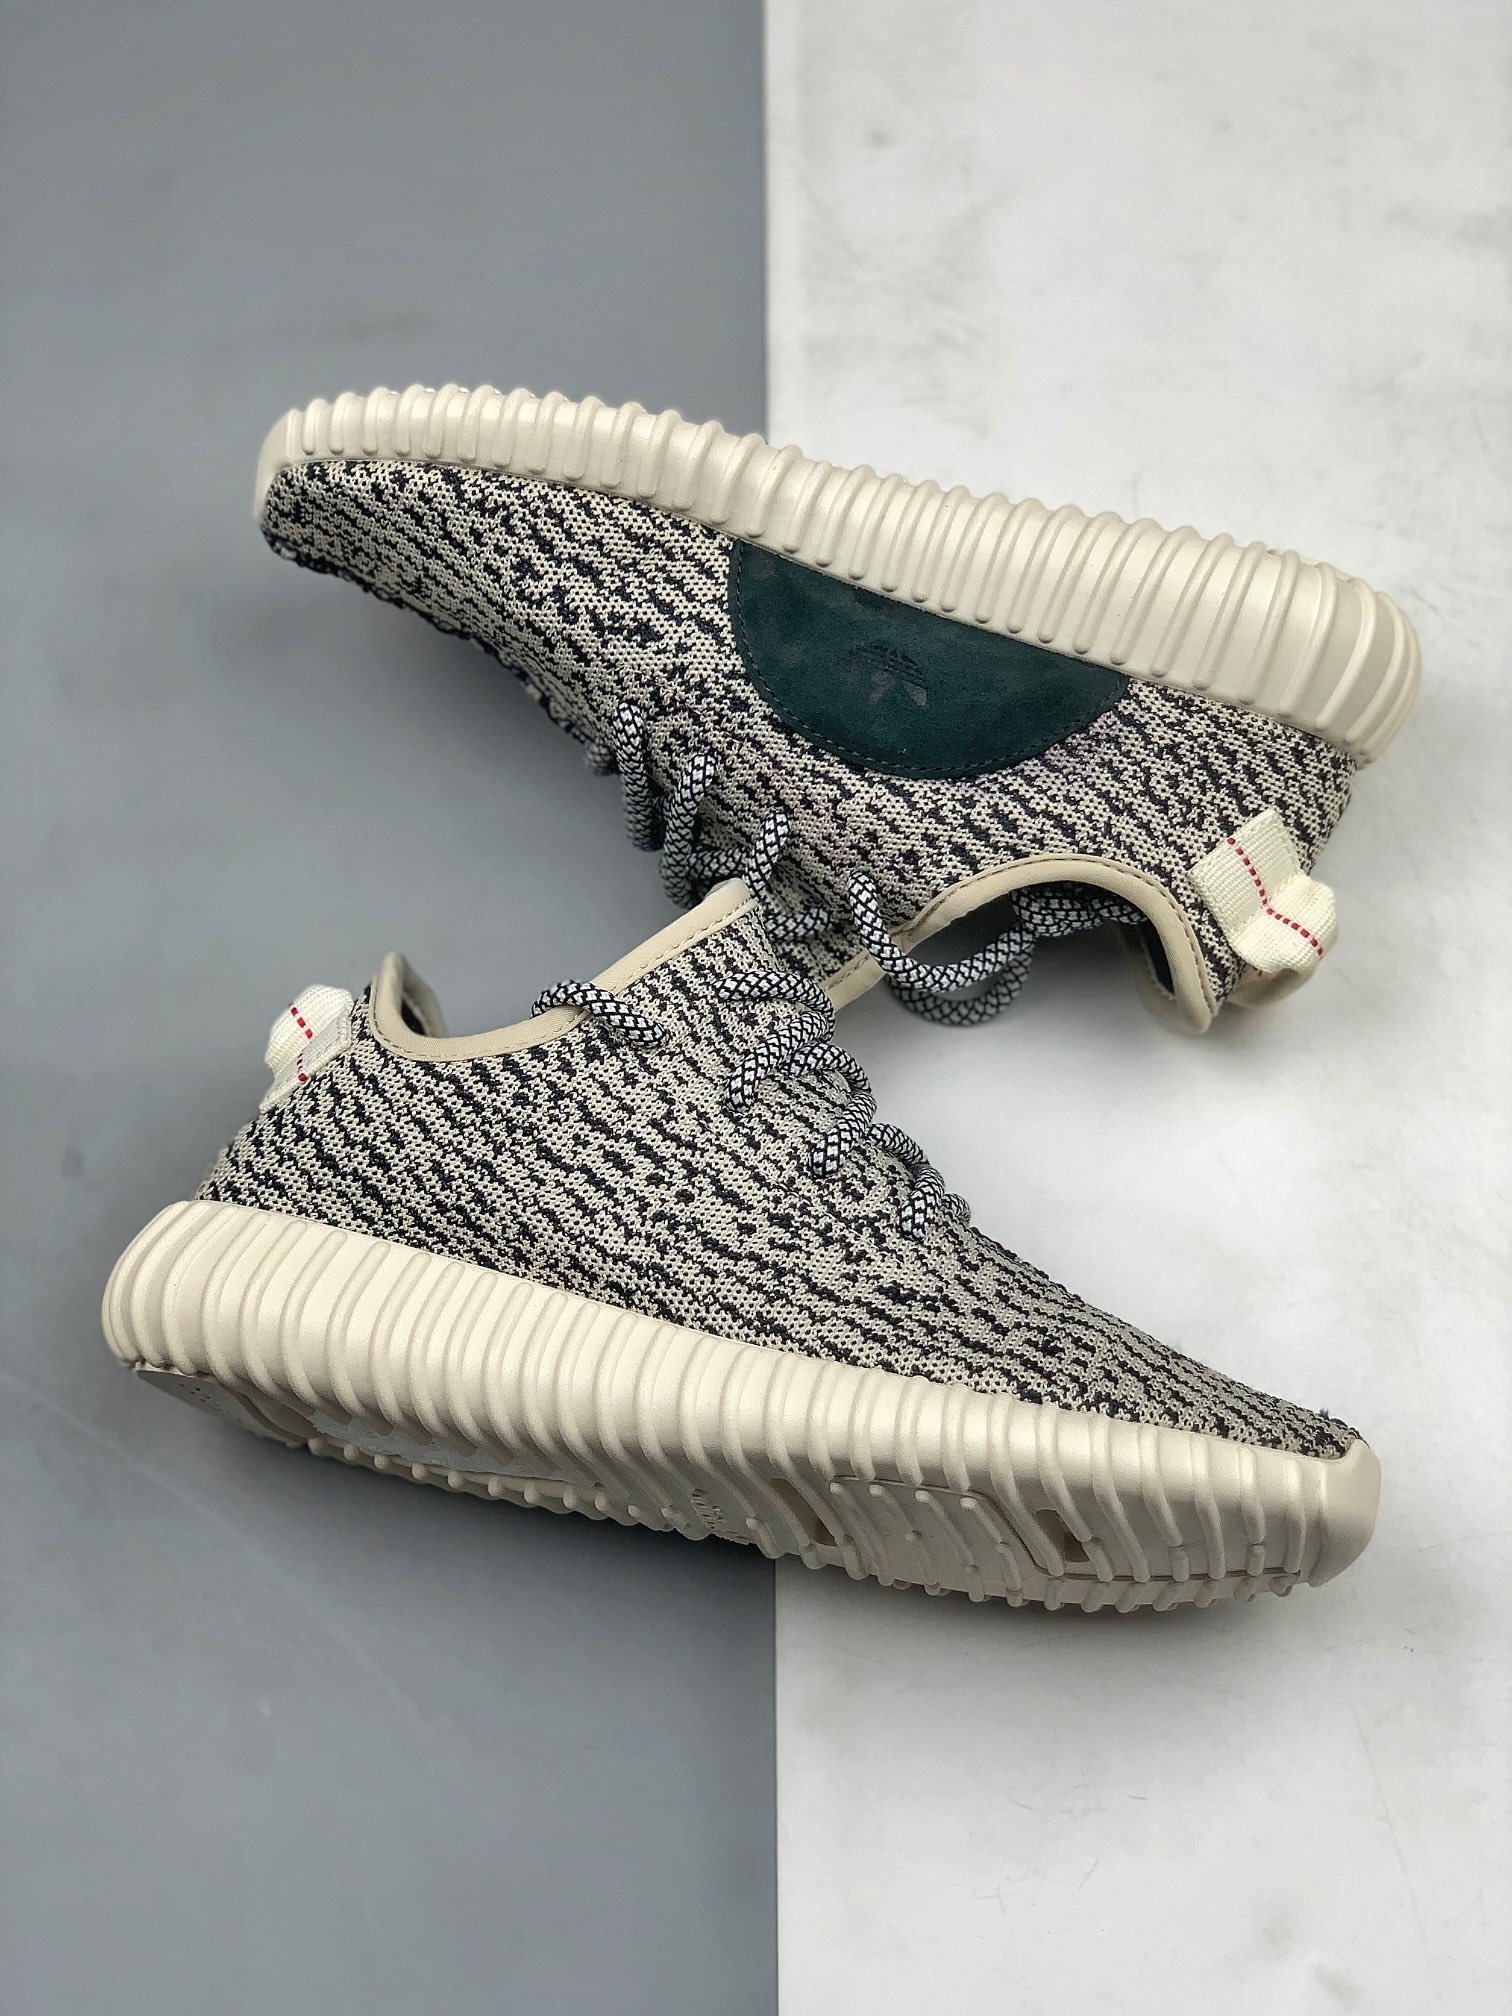 Adidas Yeezy 350 Boost Turtle Dove AQ4832 - Shop the Iconic Sneaker Online